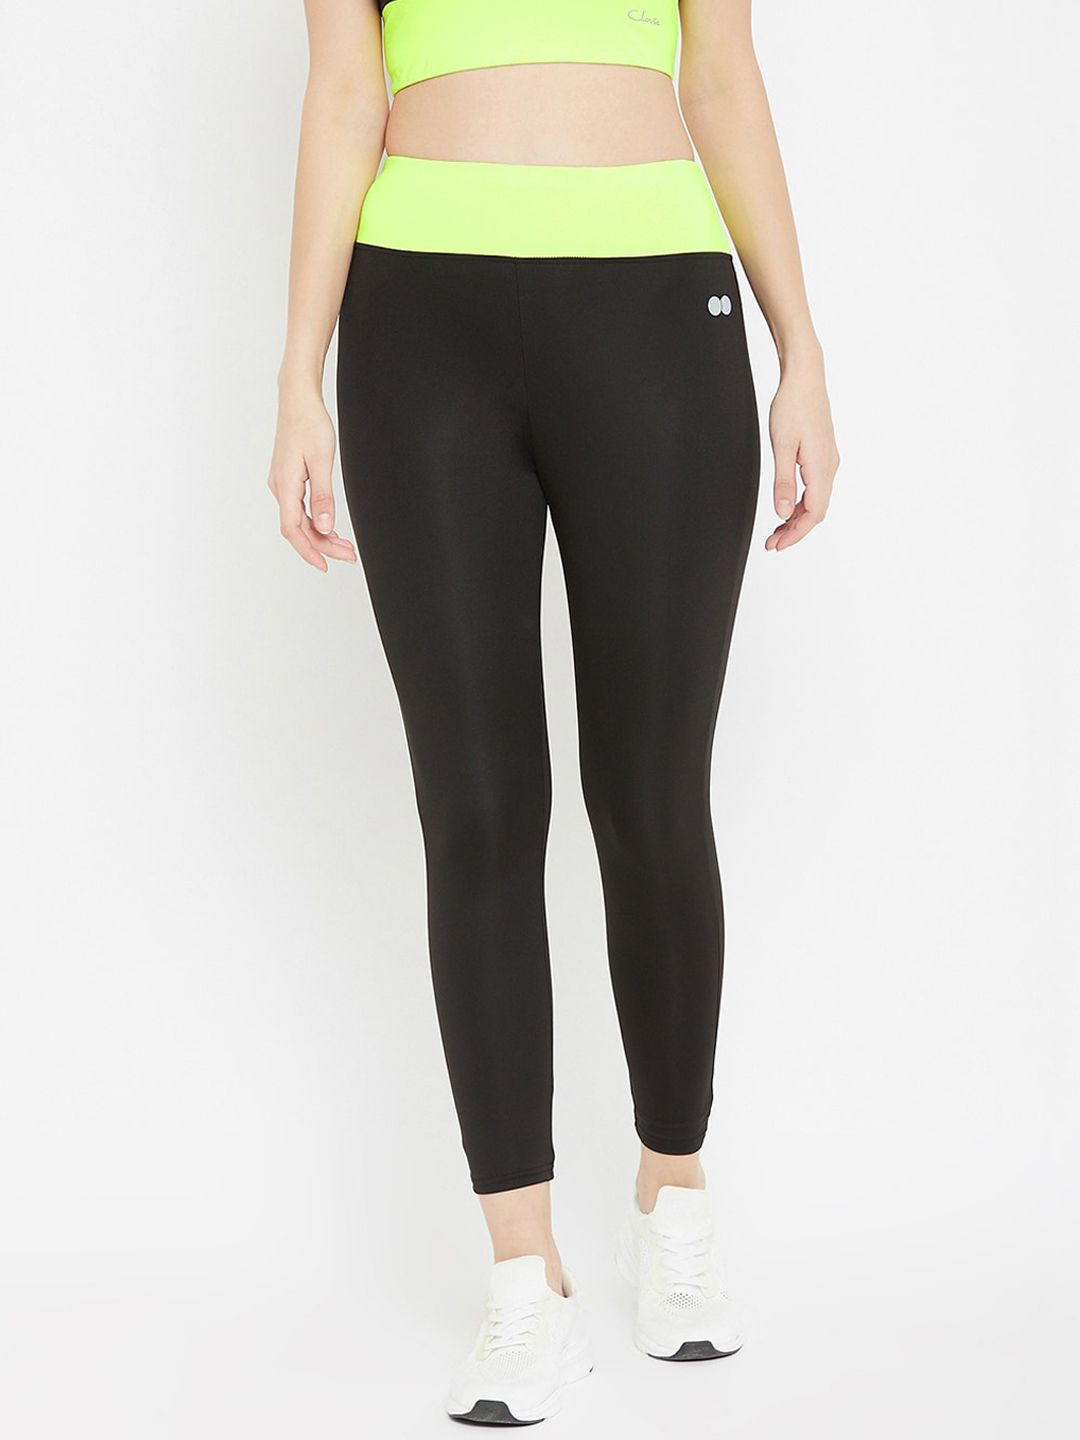 Clovia Women Black & Lime Green Colourblocked Snug Fit Active Ankle-Length Tights Price in India